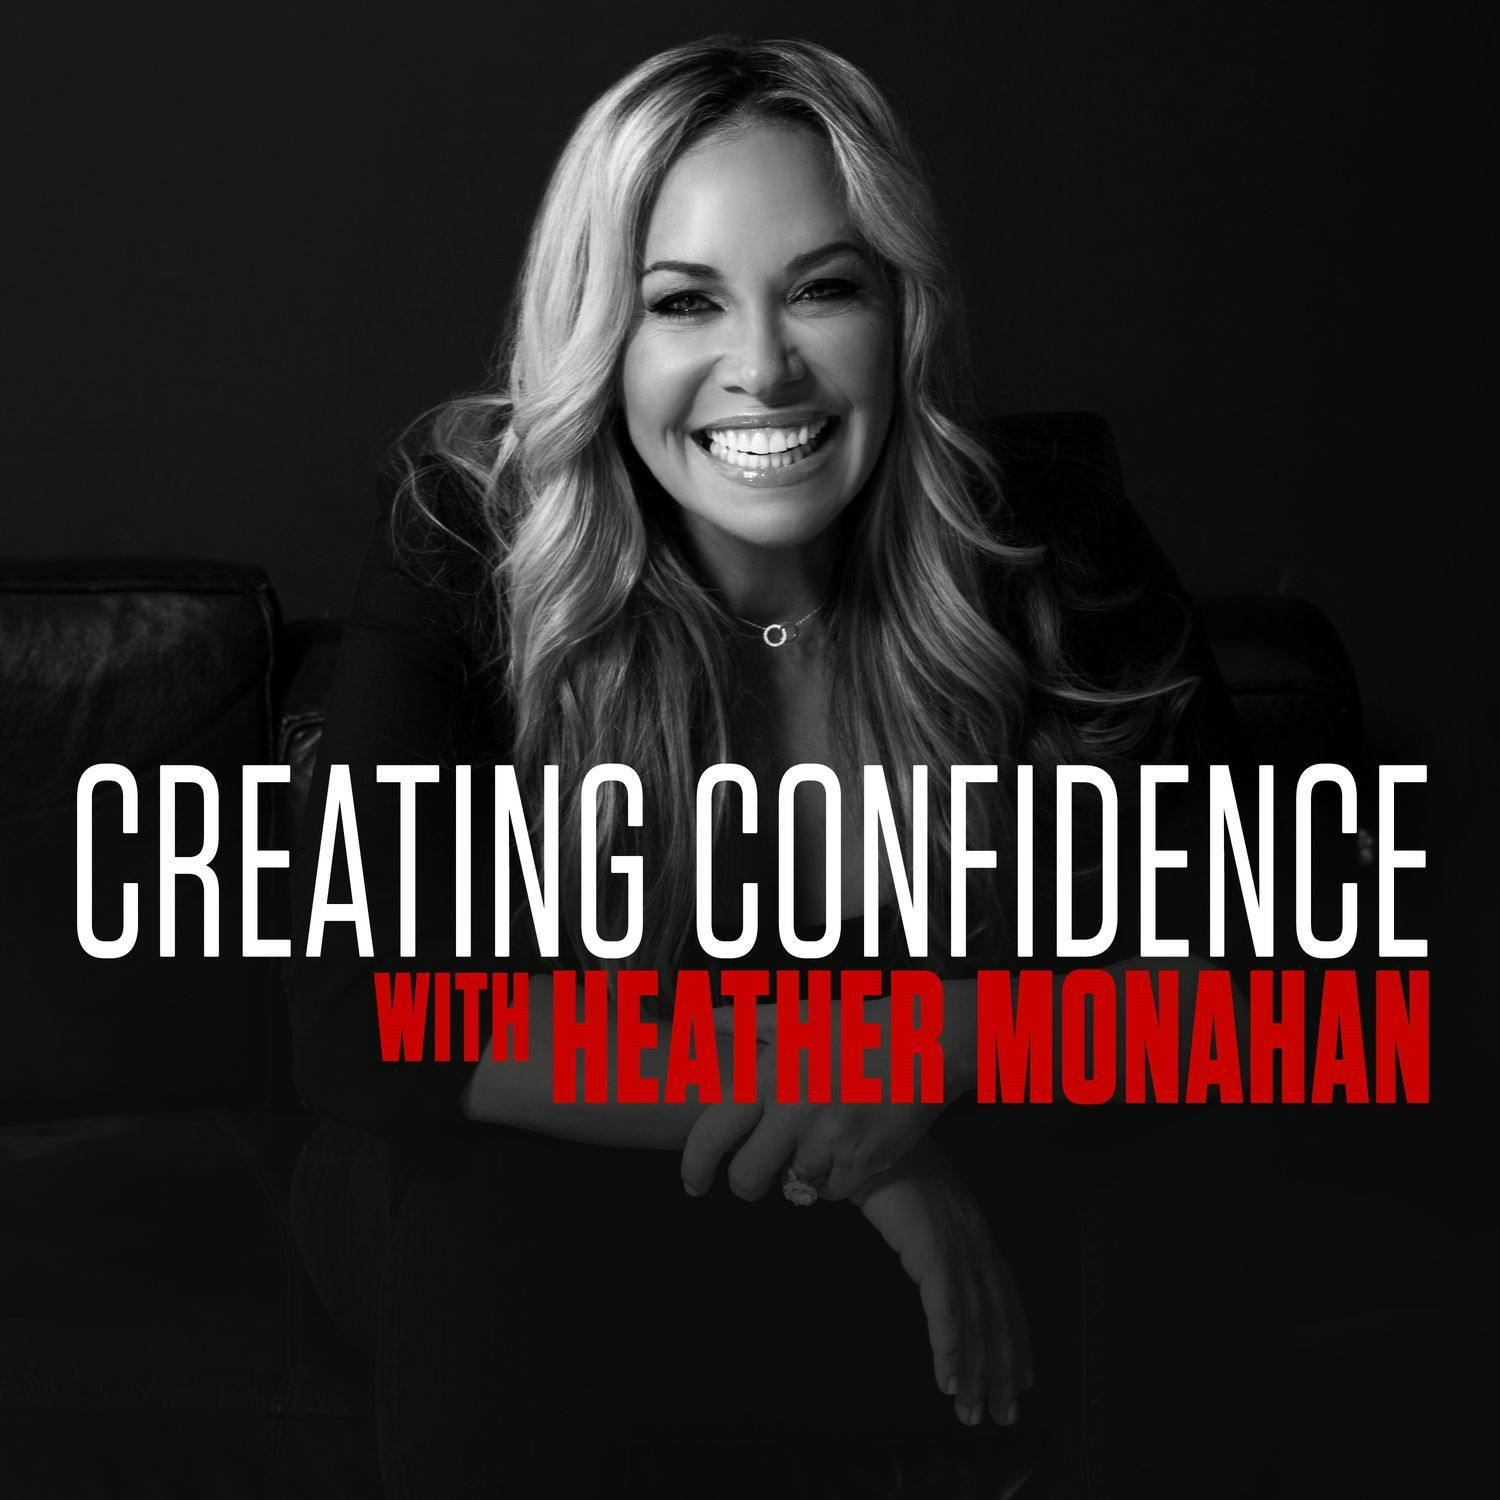 #192: The #1 Way To Bet On YOU And Go All In This Year With Heather! by Heather Monahan | YAP Media Network